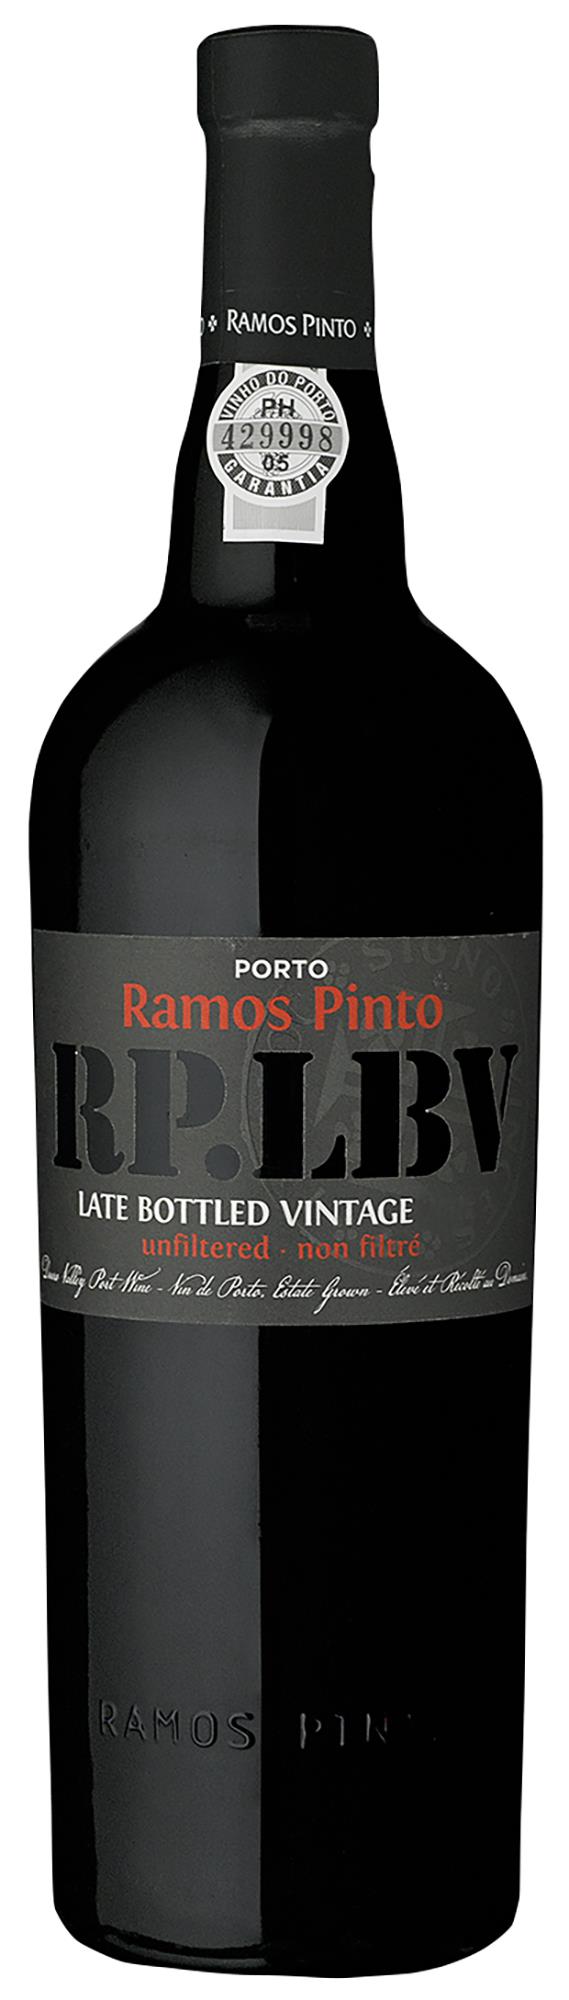 RAMOS-PINTO LATE BOTTLED VINTAGE 2018 